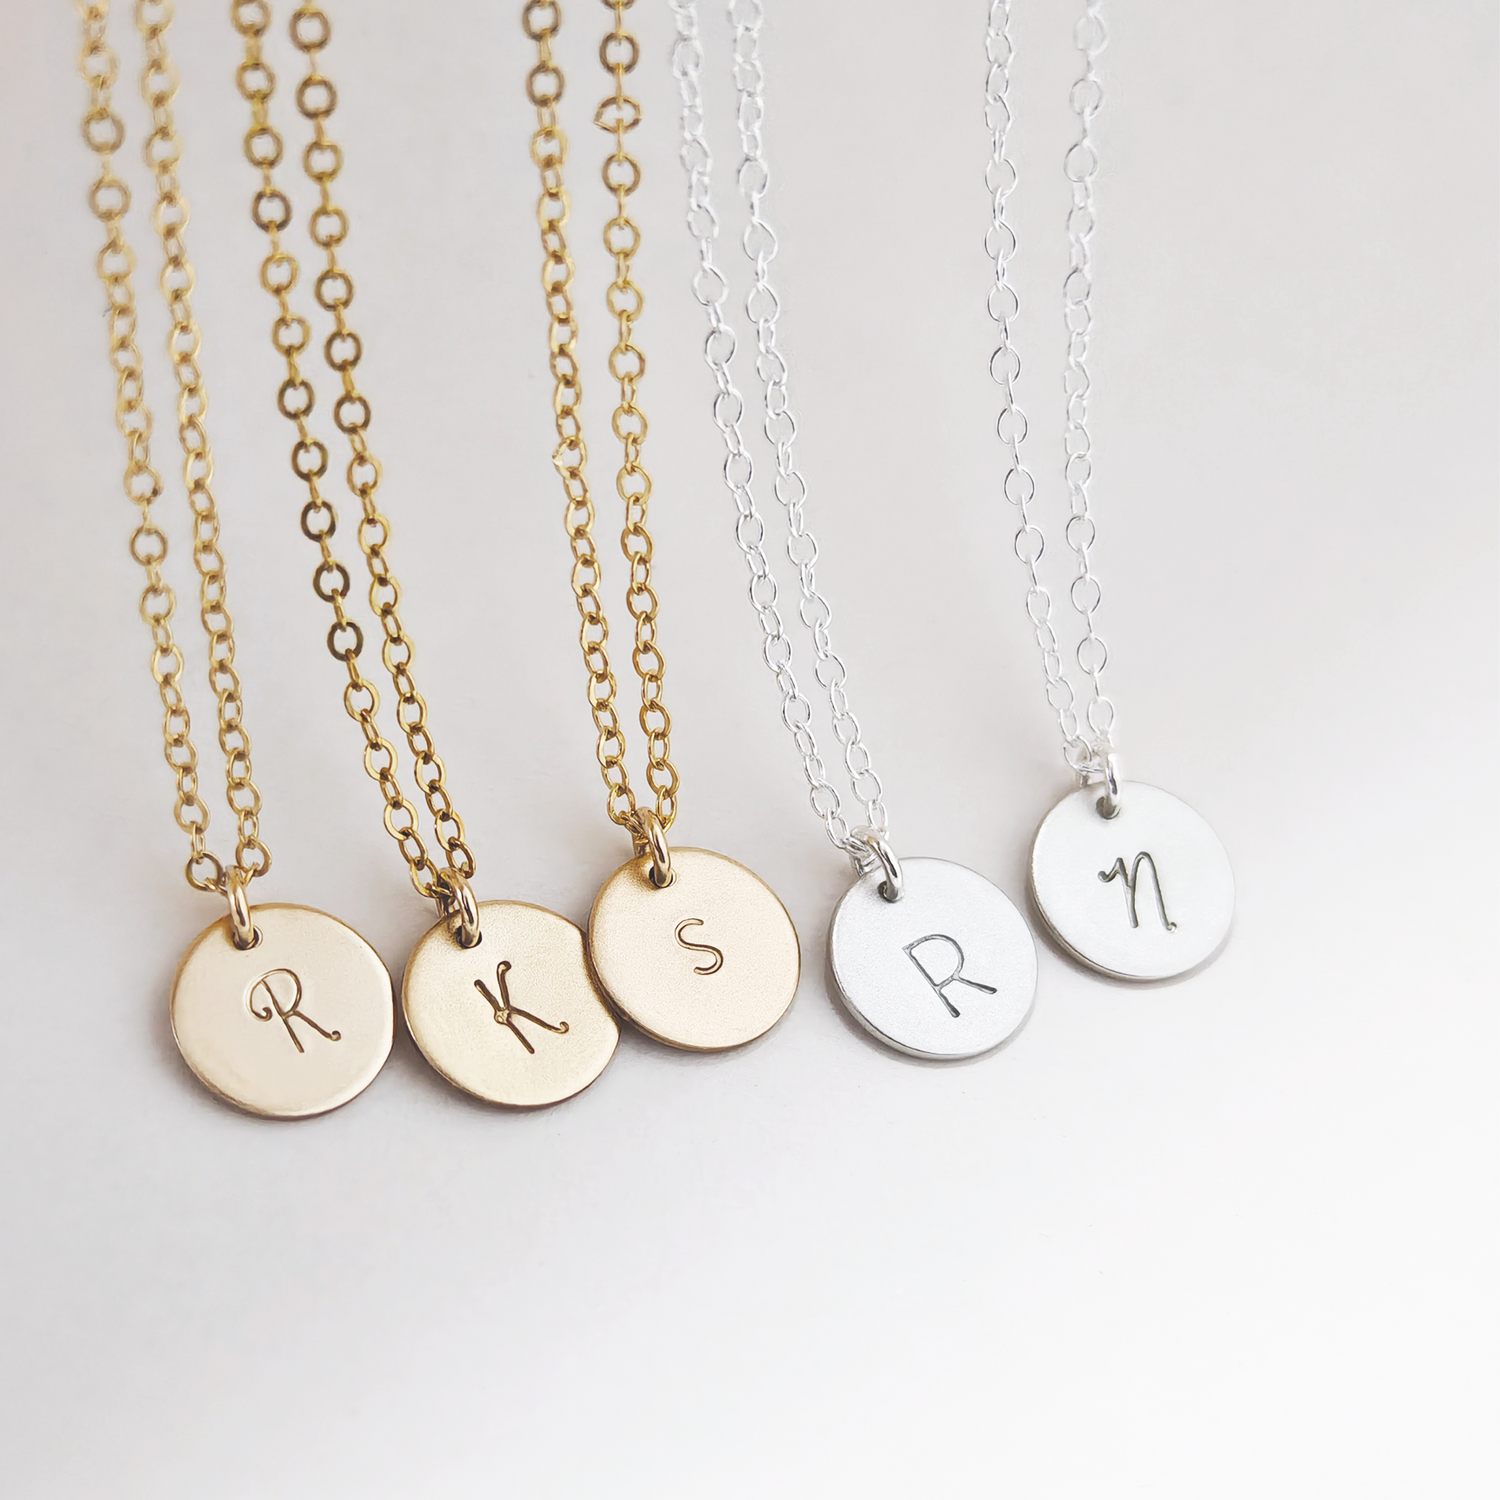 Personalized Disc Necklace Silver